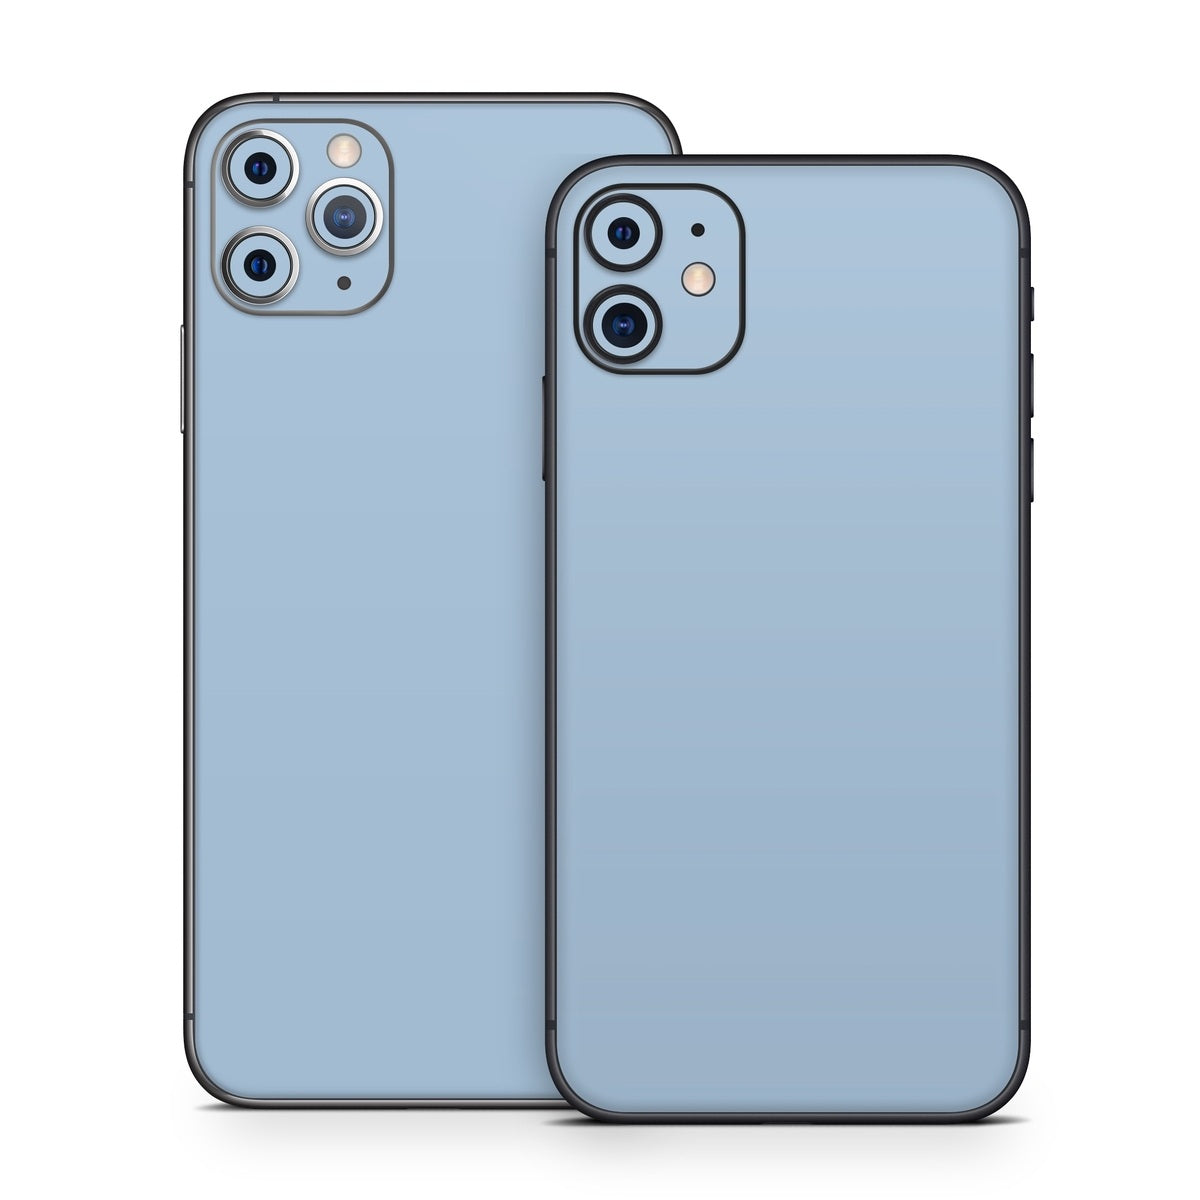 Solid State Blue Mist - Apple iPhone 11 Skin